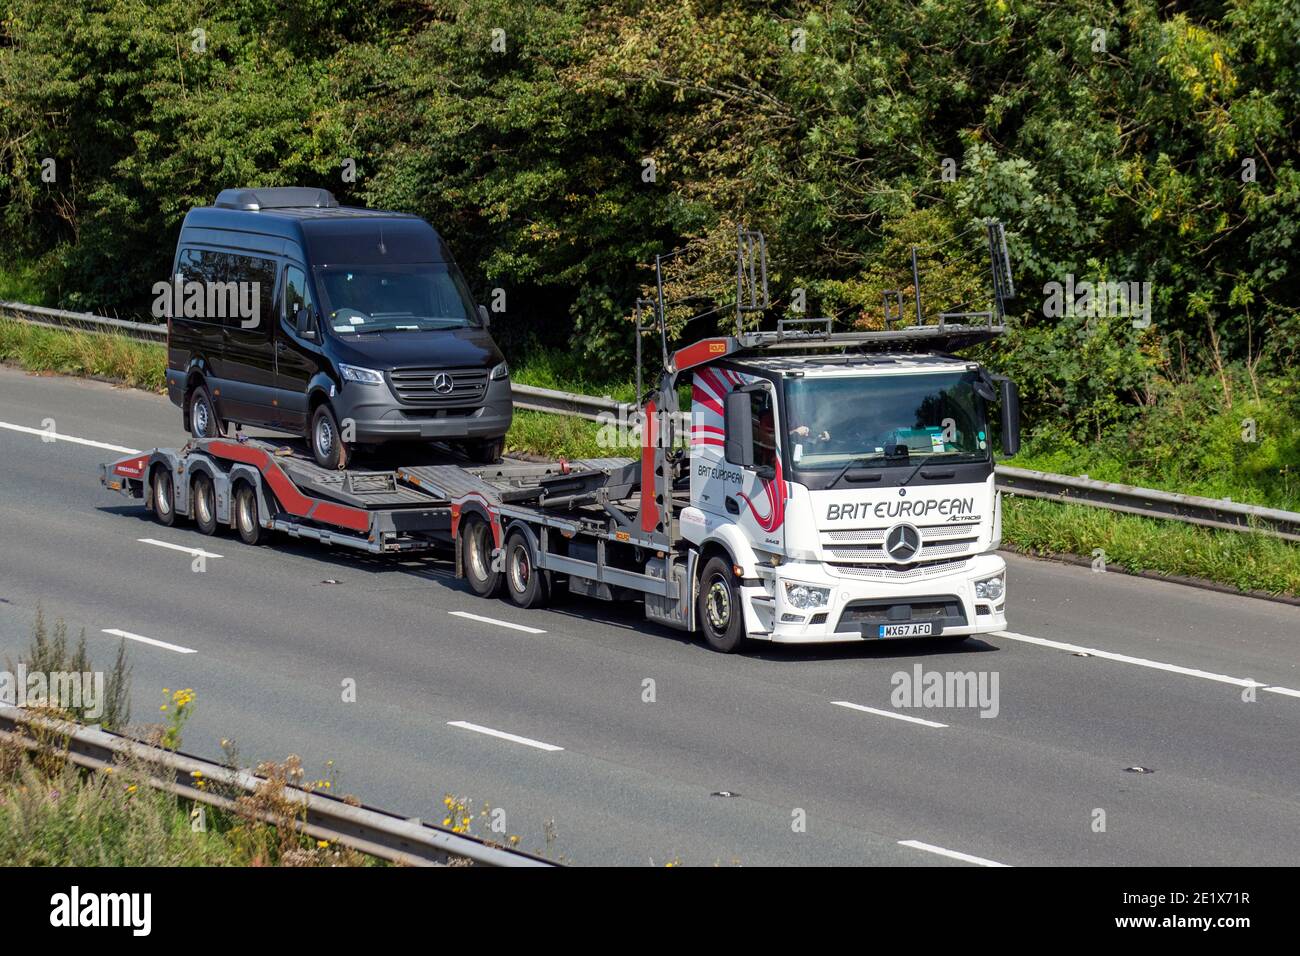 Brit European car transporter drivers:  Vehicle delivery trucks carrying Mercedes Benz sprint on lorry trailer, heavy-duty vehicles, transportation, truck, car carrier vehicle, European commercial transport industry HGV, M6 at Manchester, UK Stock Photo